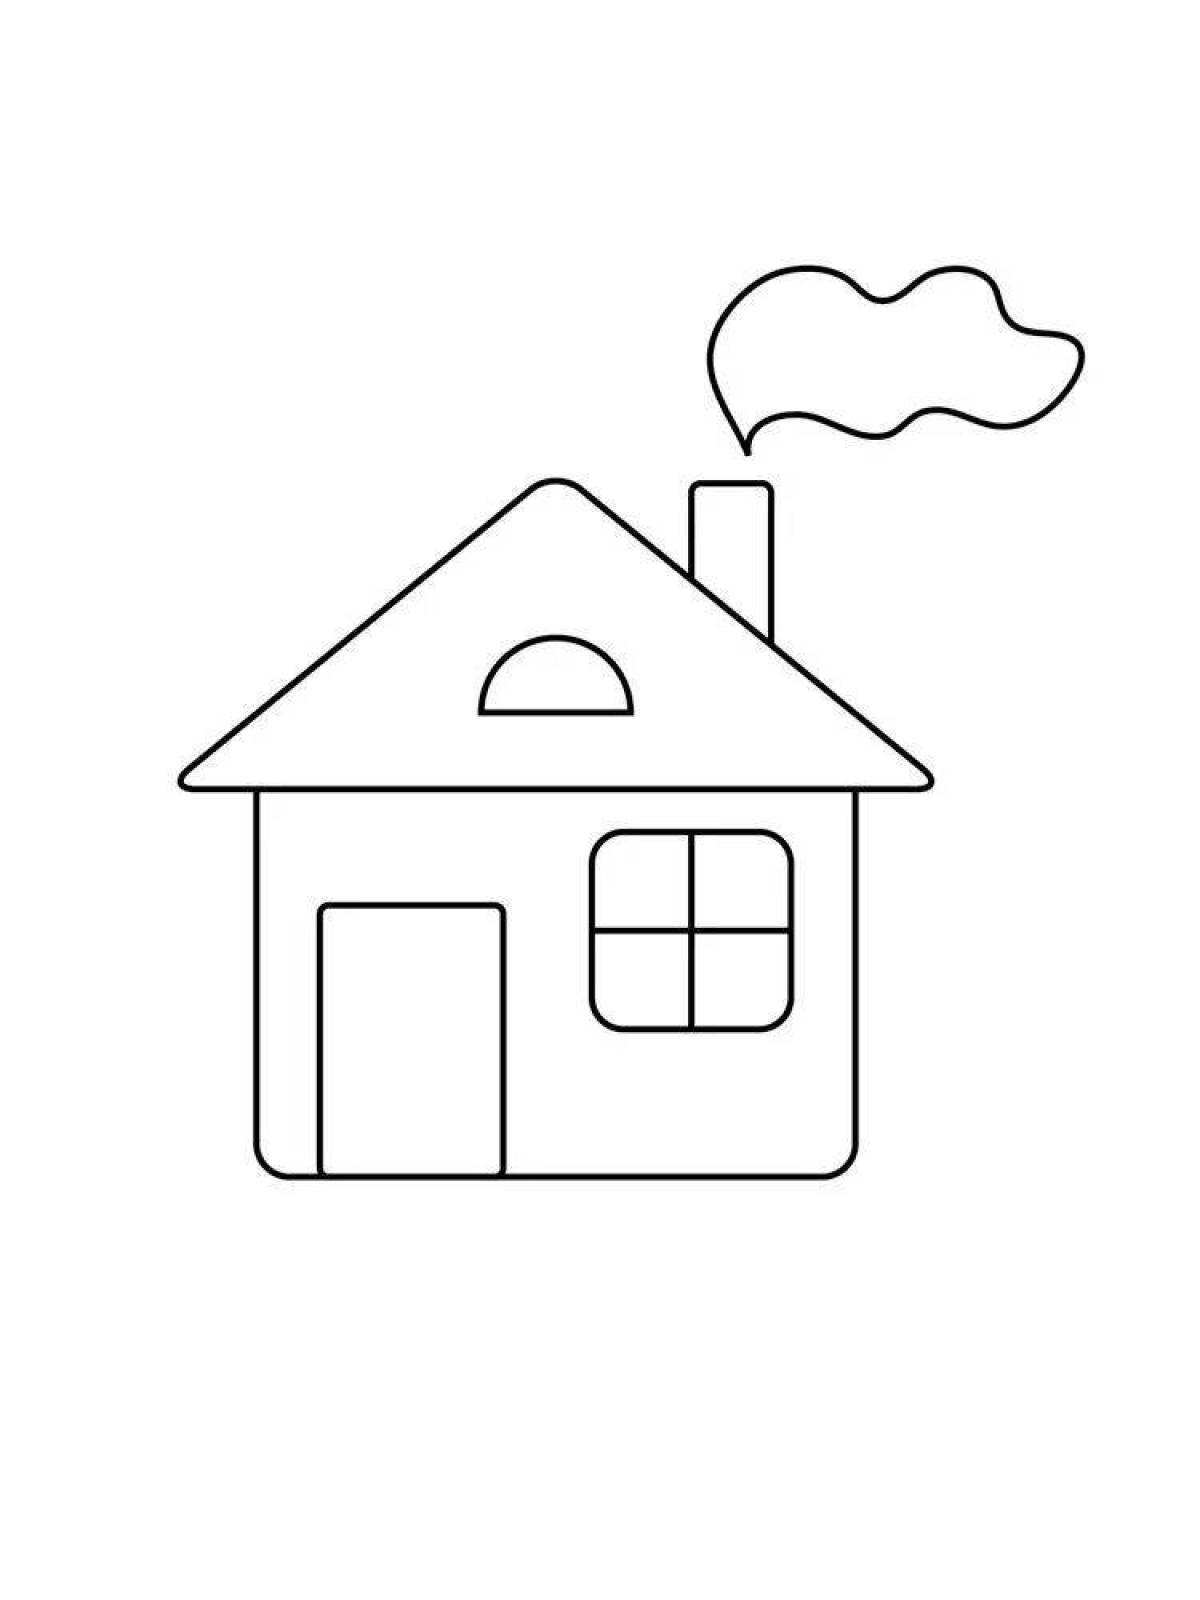 Majestic drawing of a house